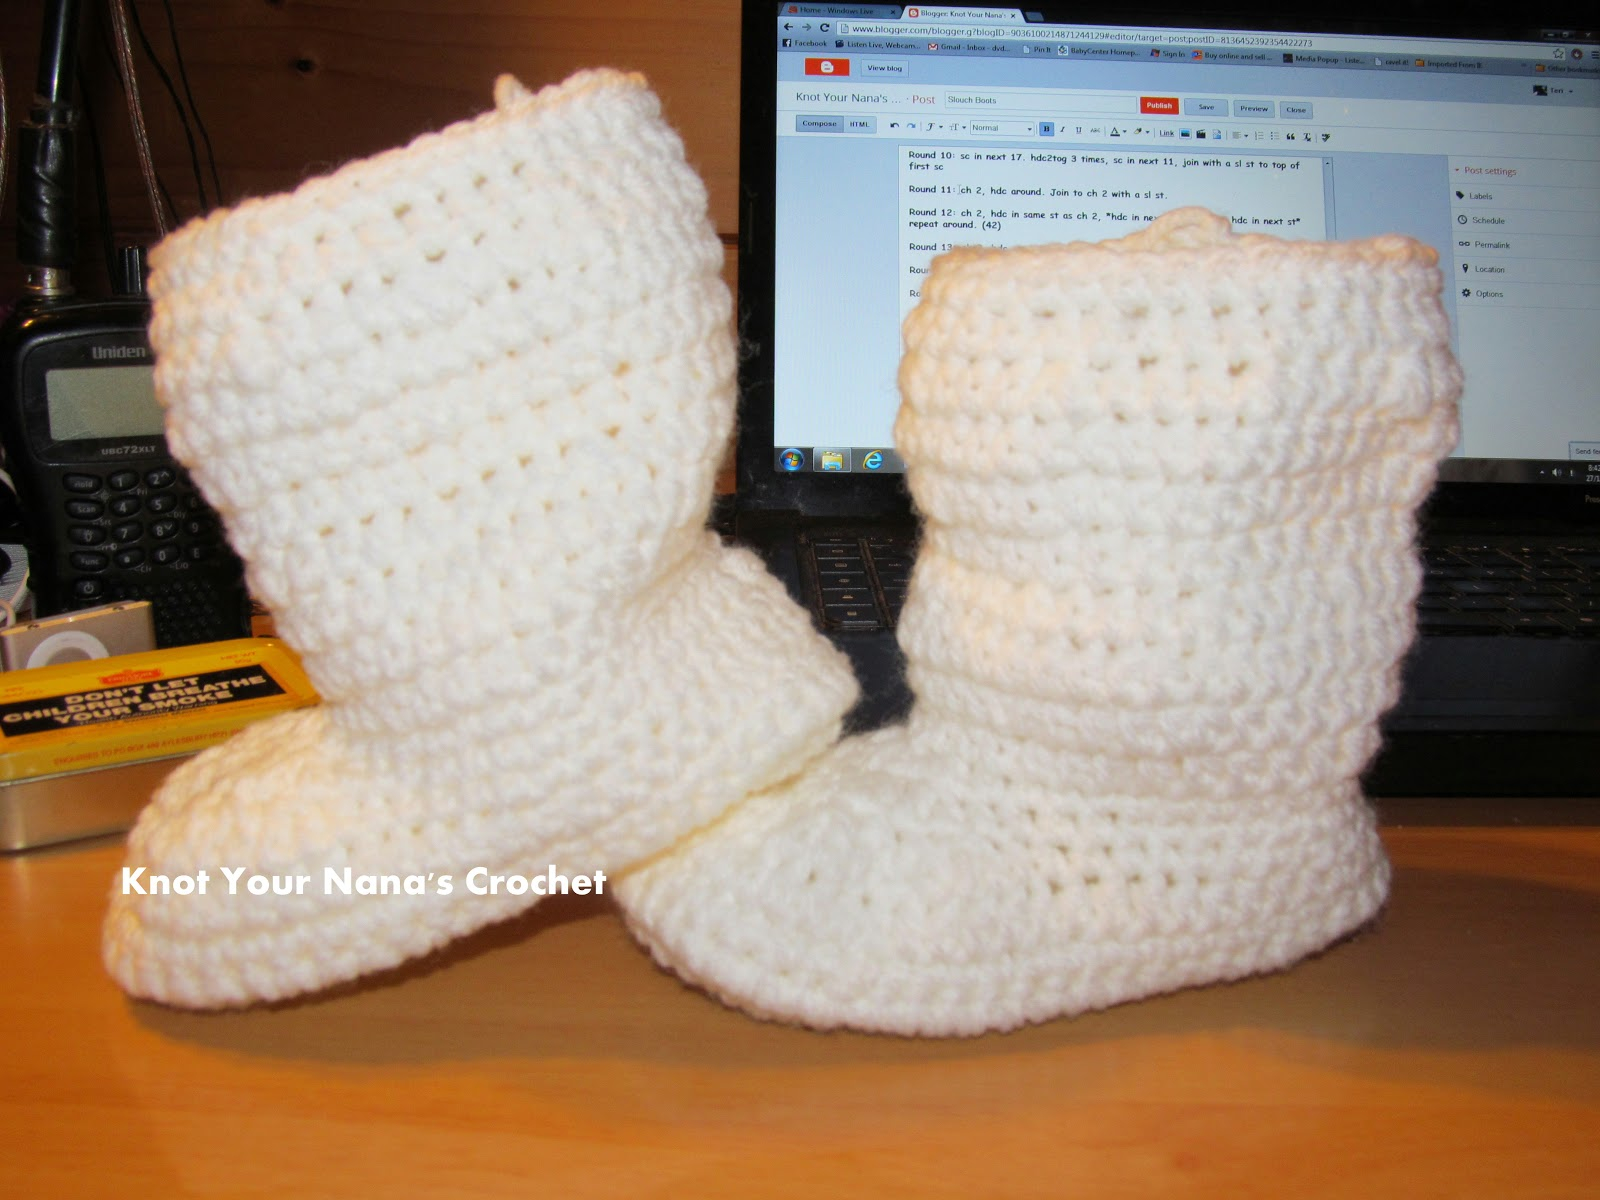 Hollydoll Crochet Boot Slippers Pattern Free Crochet Pattern For Slouchy Slipper Boots Traitoro For